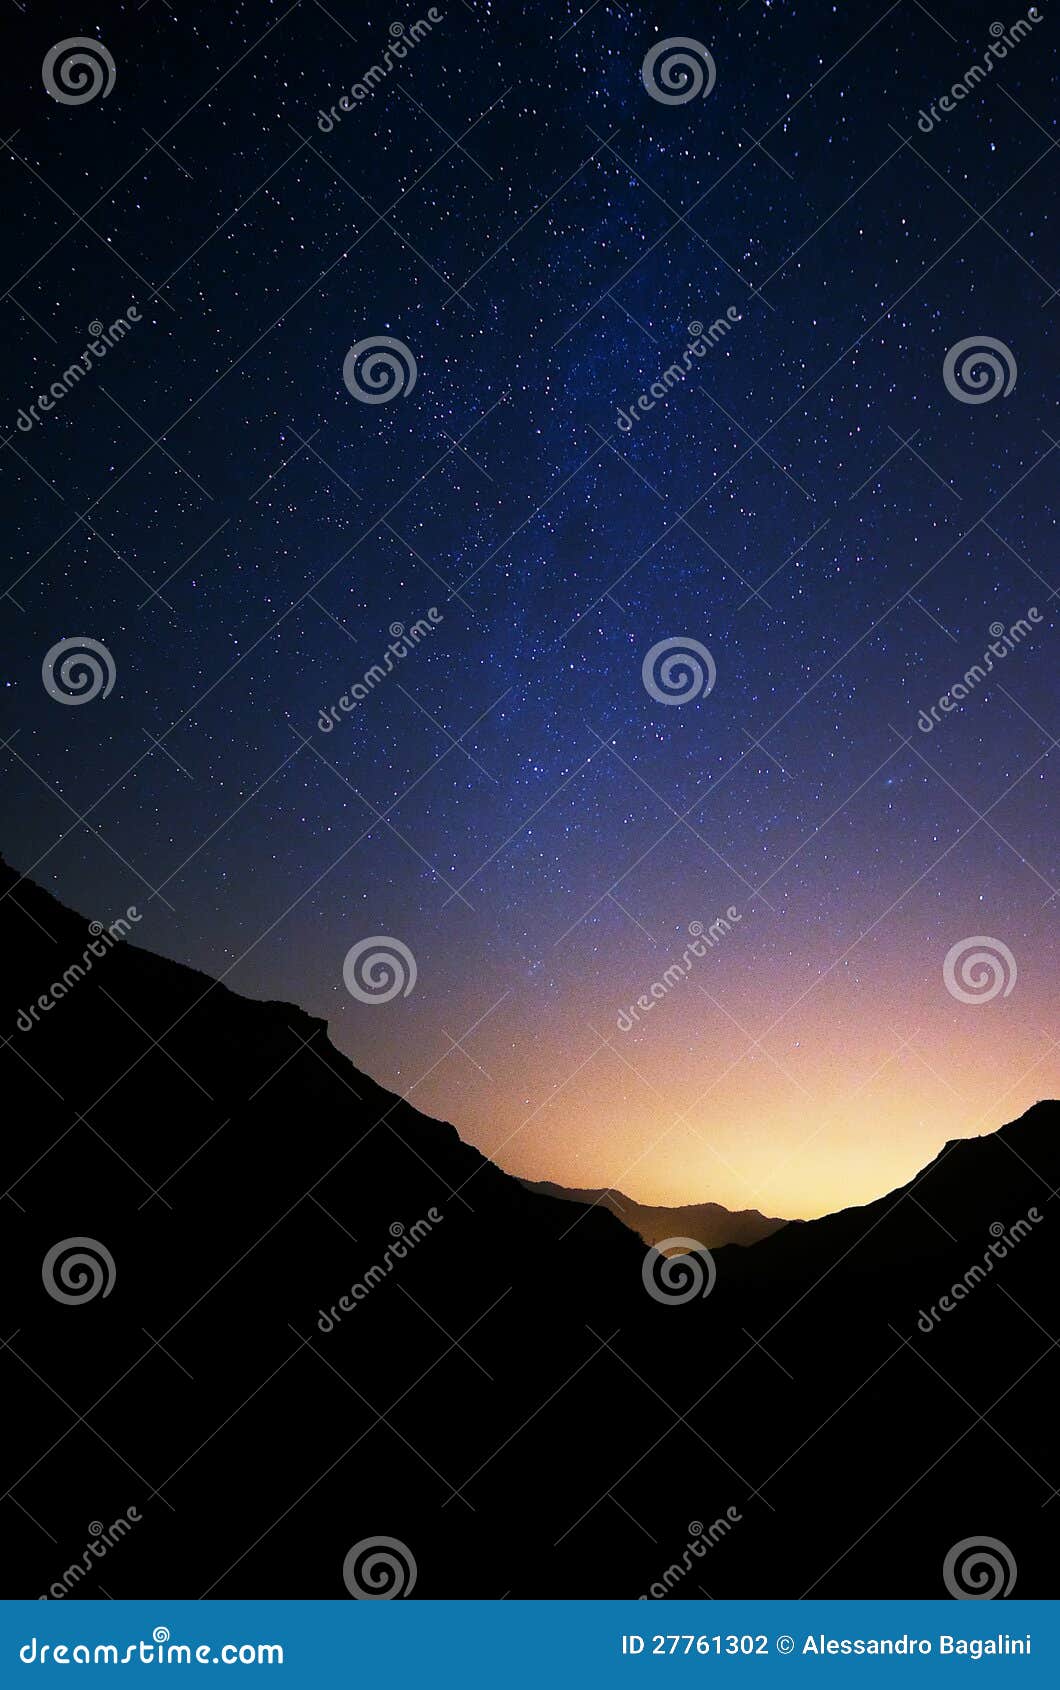 Sky Full Of Stars Images – Browse 335 Stock Photos, Vectors, and